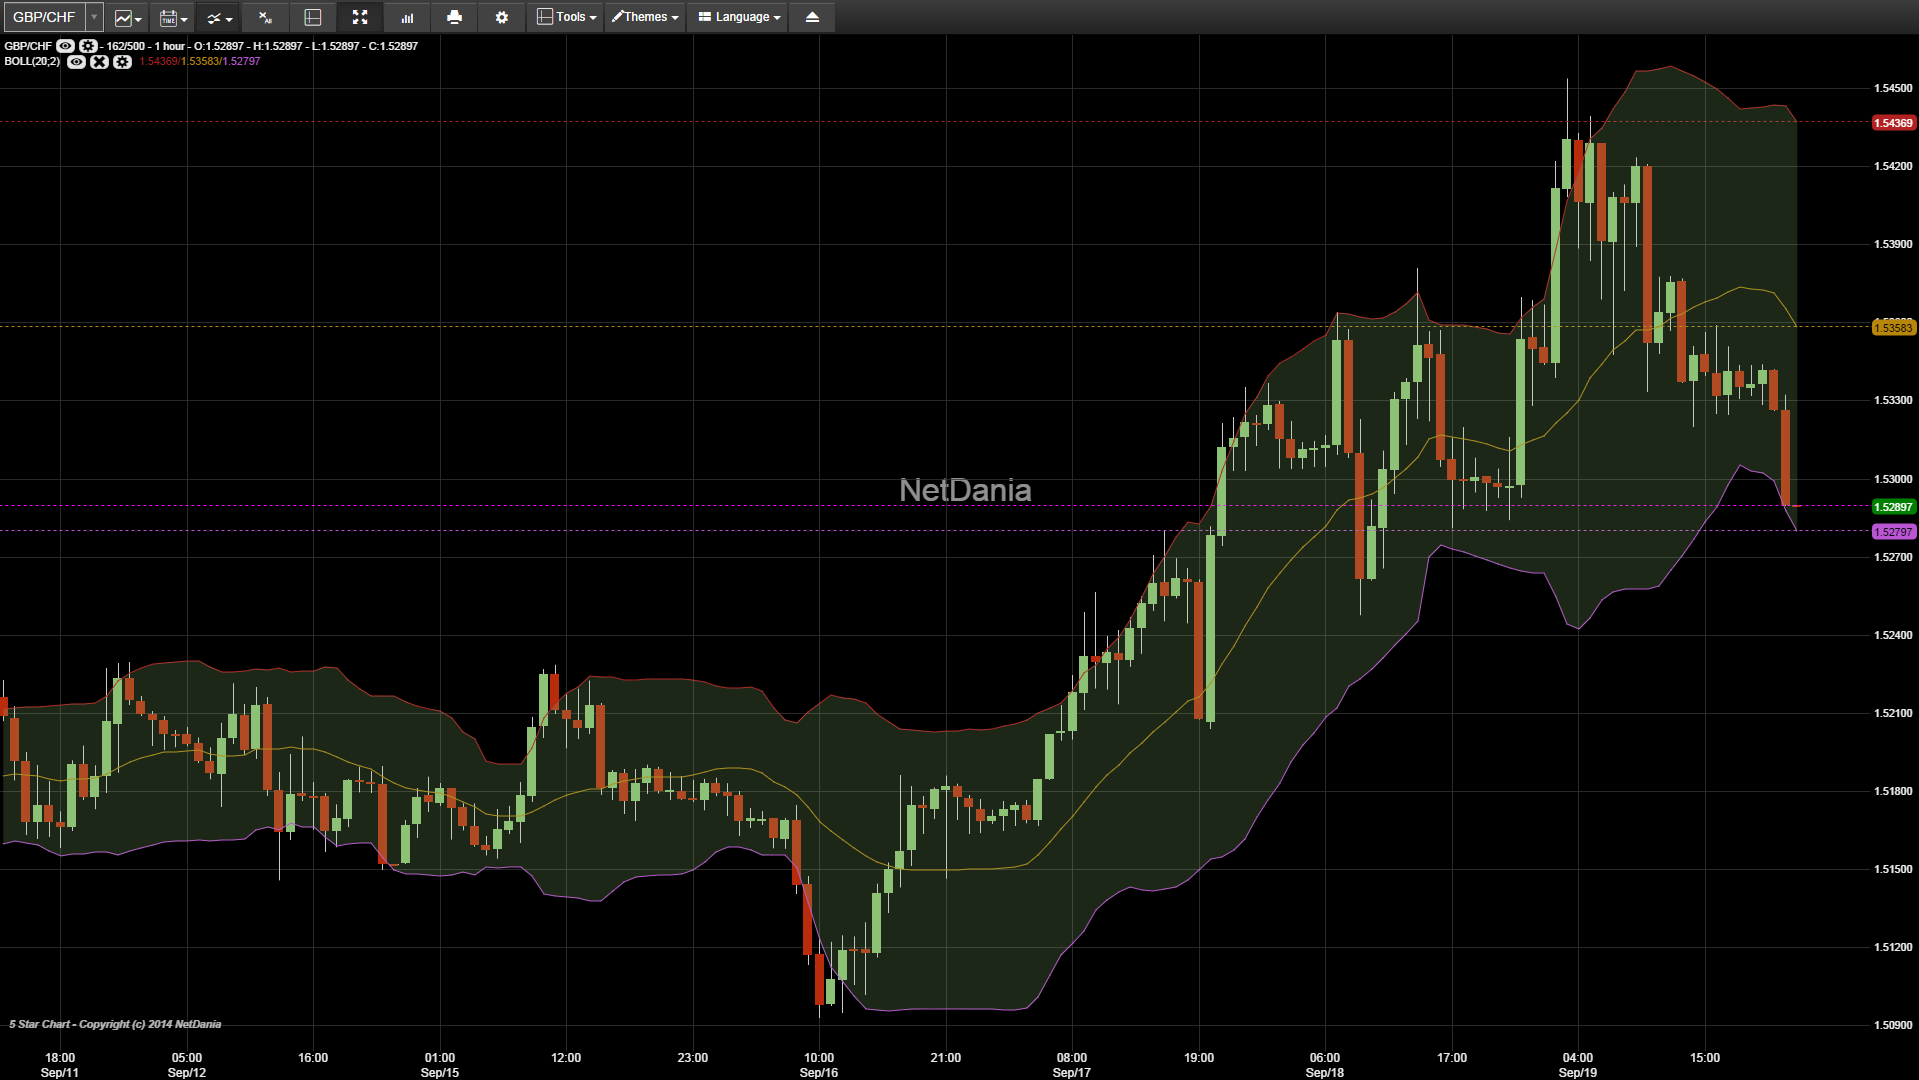 Free forex charts netdania charts who owns the financial times